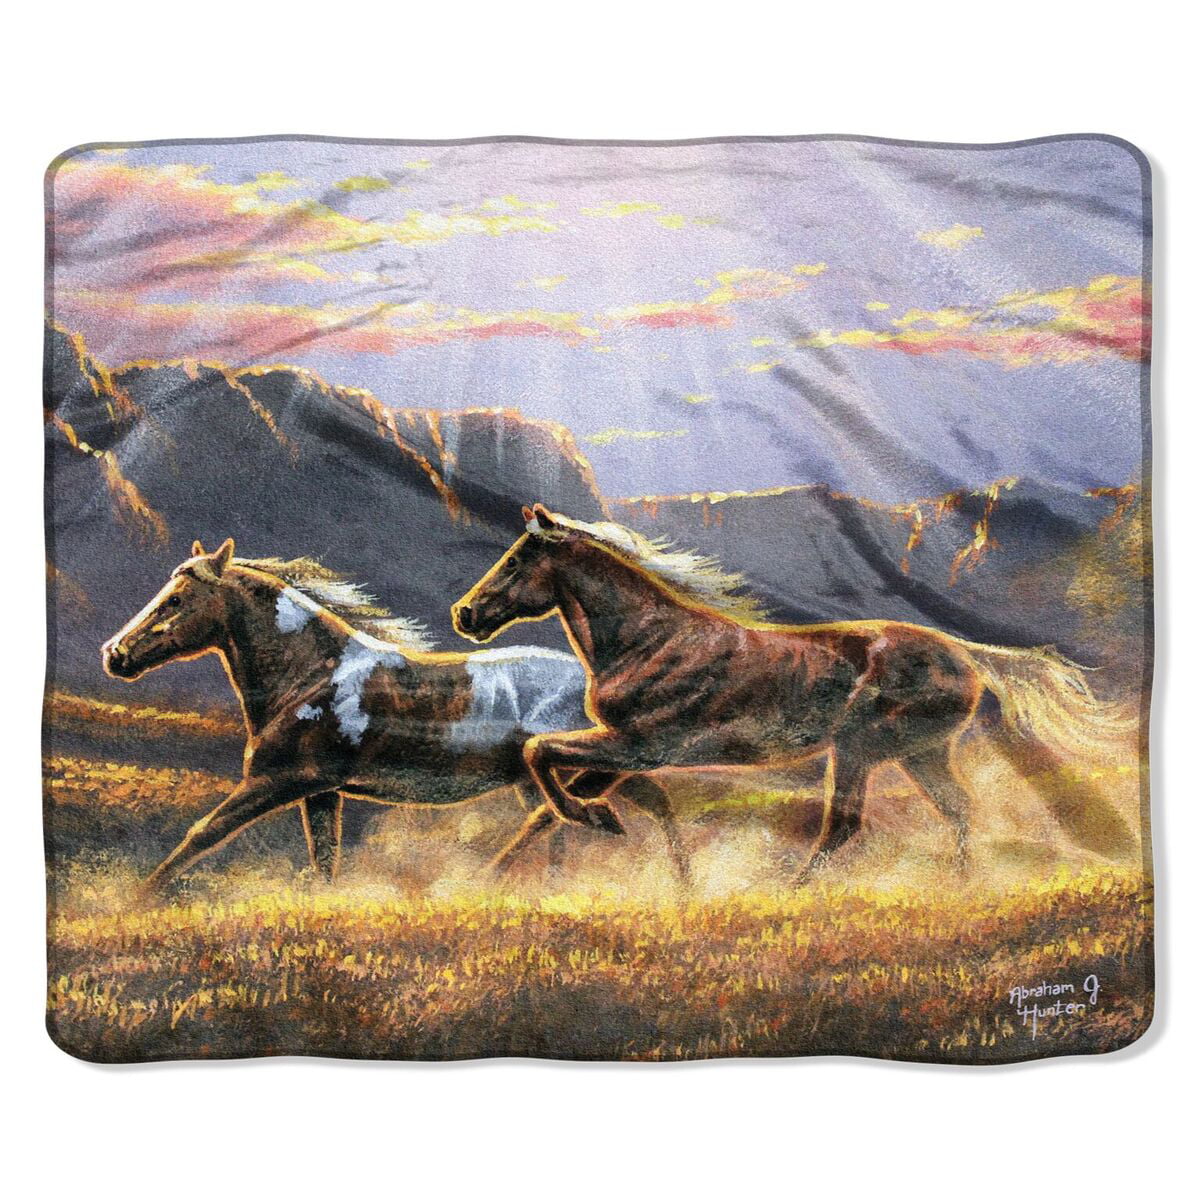 The Northwest Company American Heritage Silk Touch 50